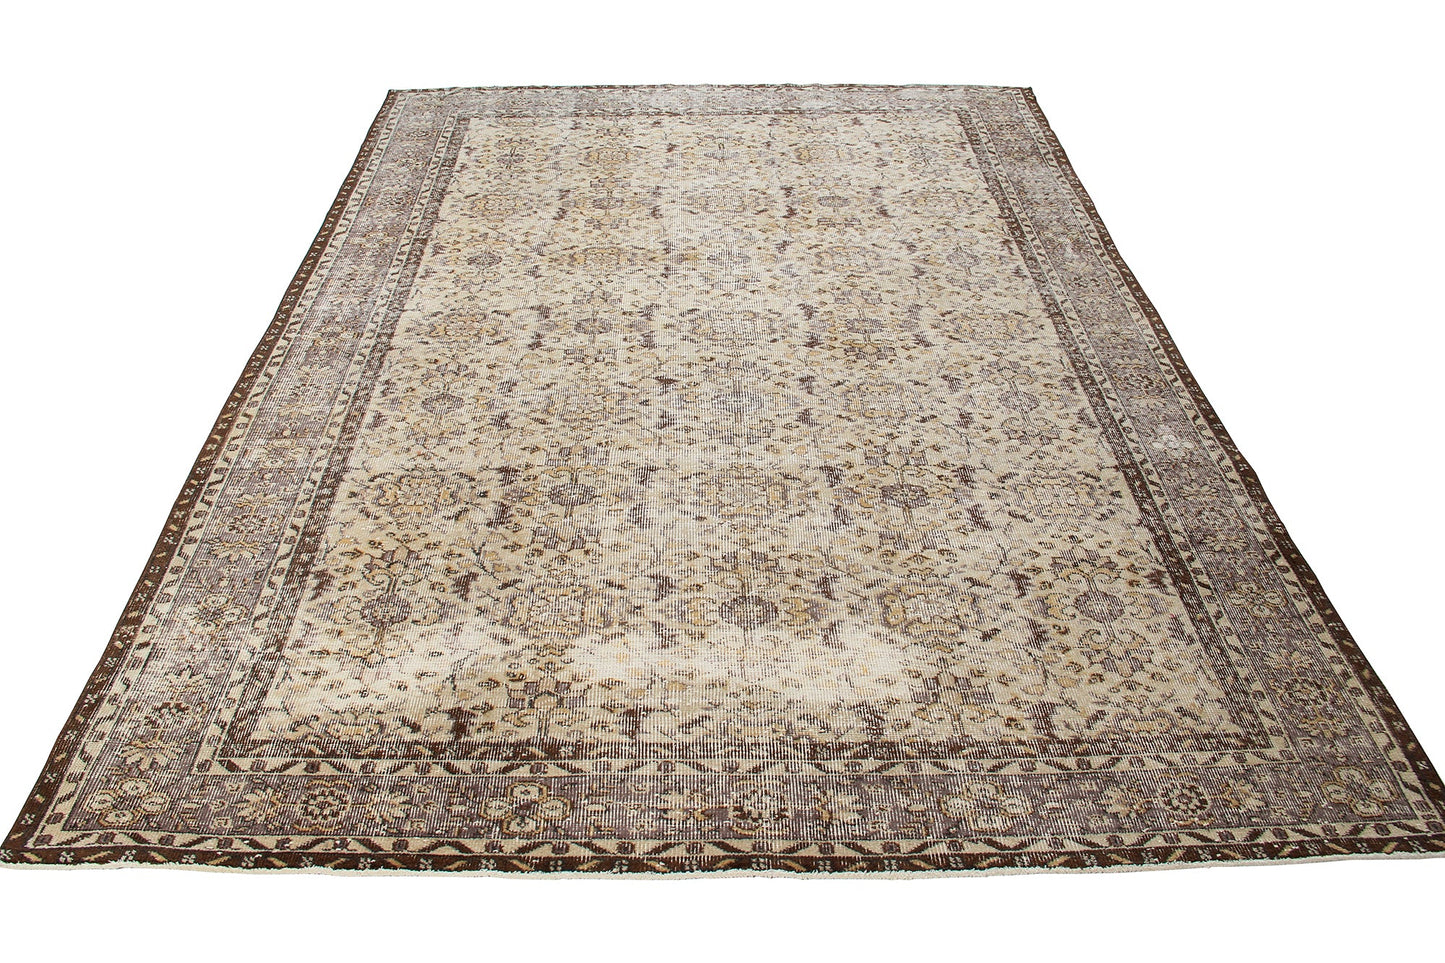 Vintage Wool Rug With a Traditional Floral Design product image #27556027170986